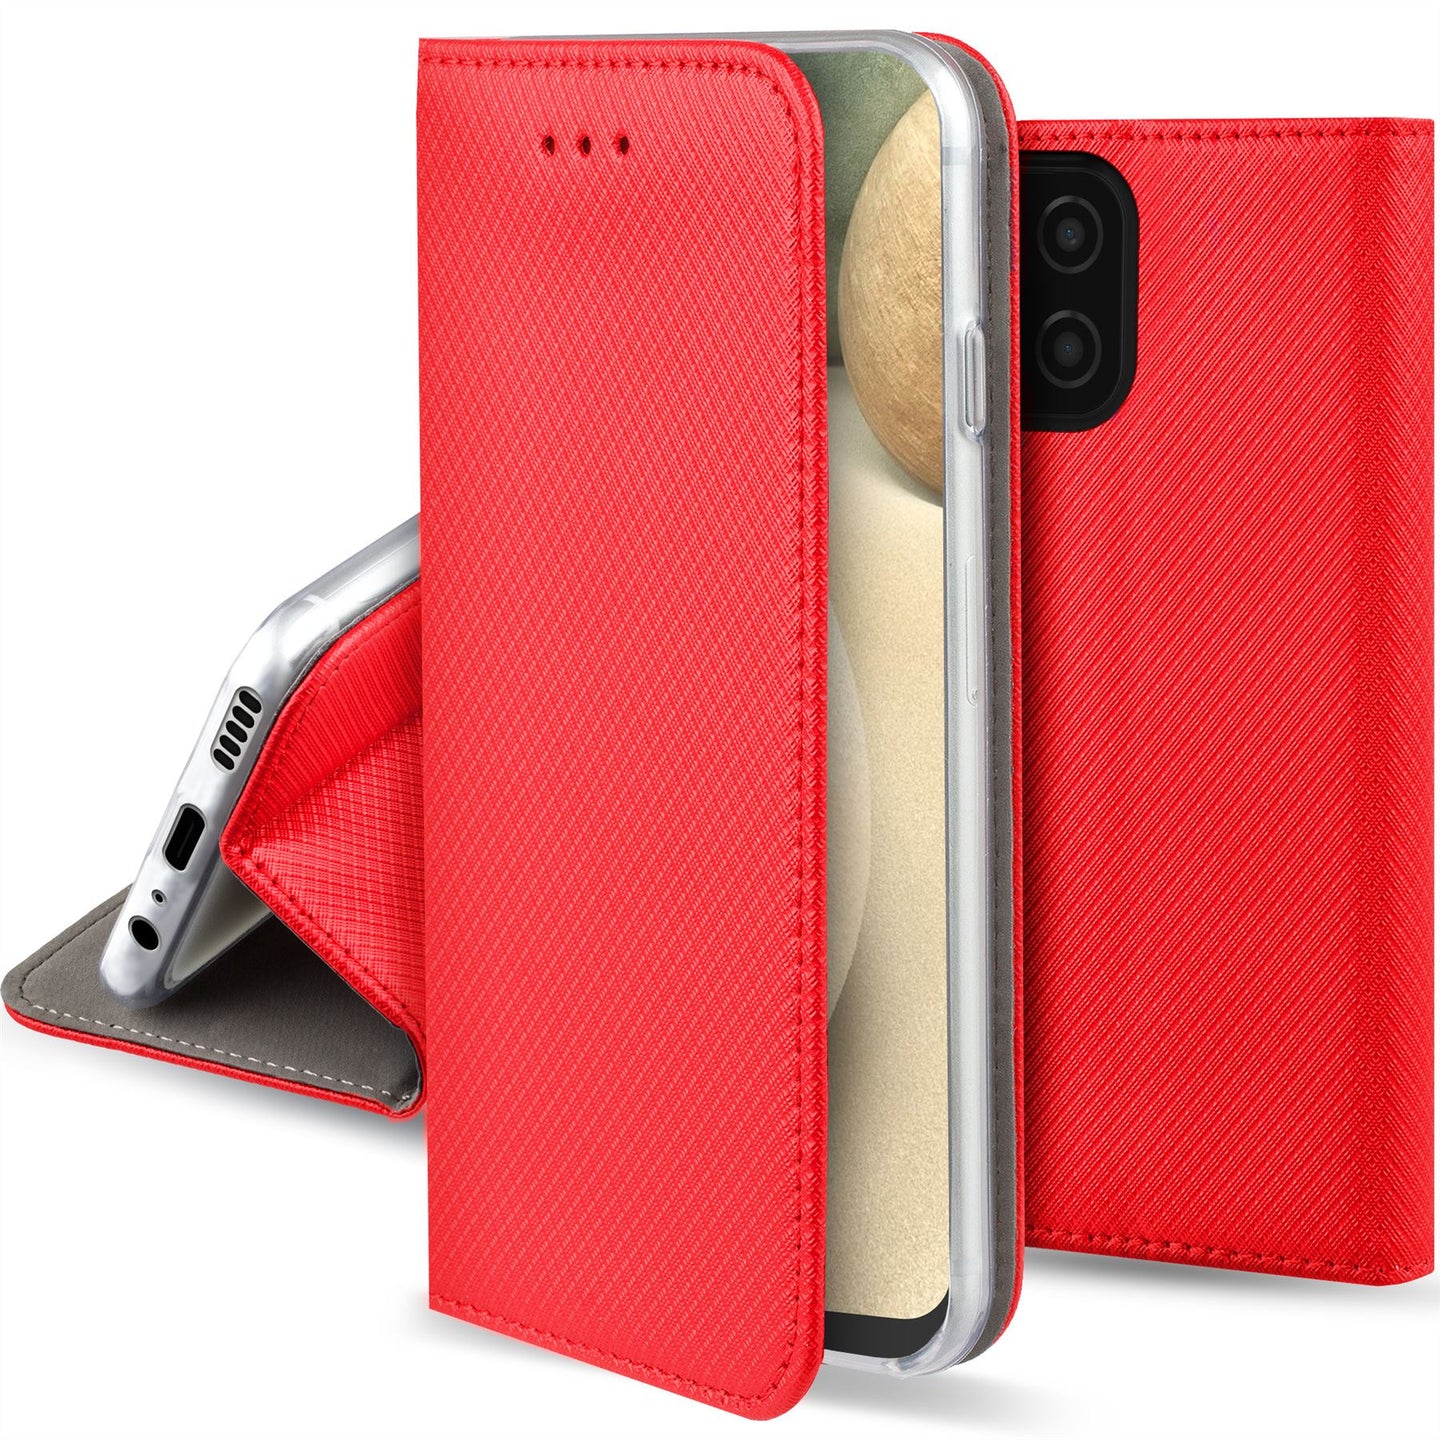 Moozy Case Flip Cover for Samsung A12, Red - Smart Magnetic Flip Case with Card Holder and Stand